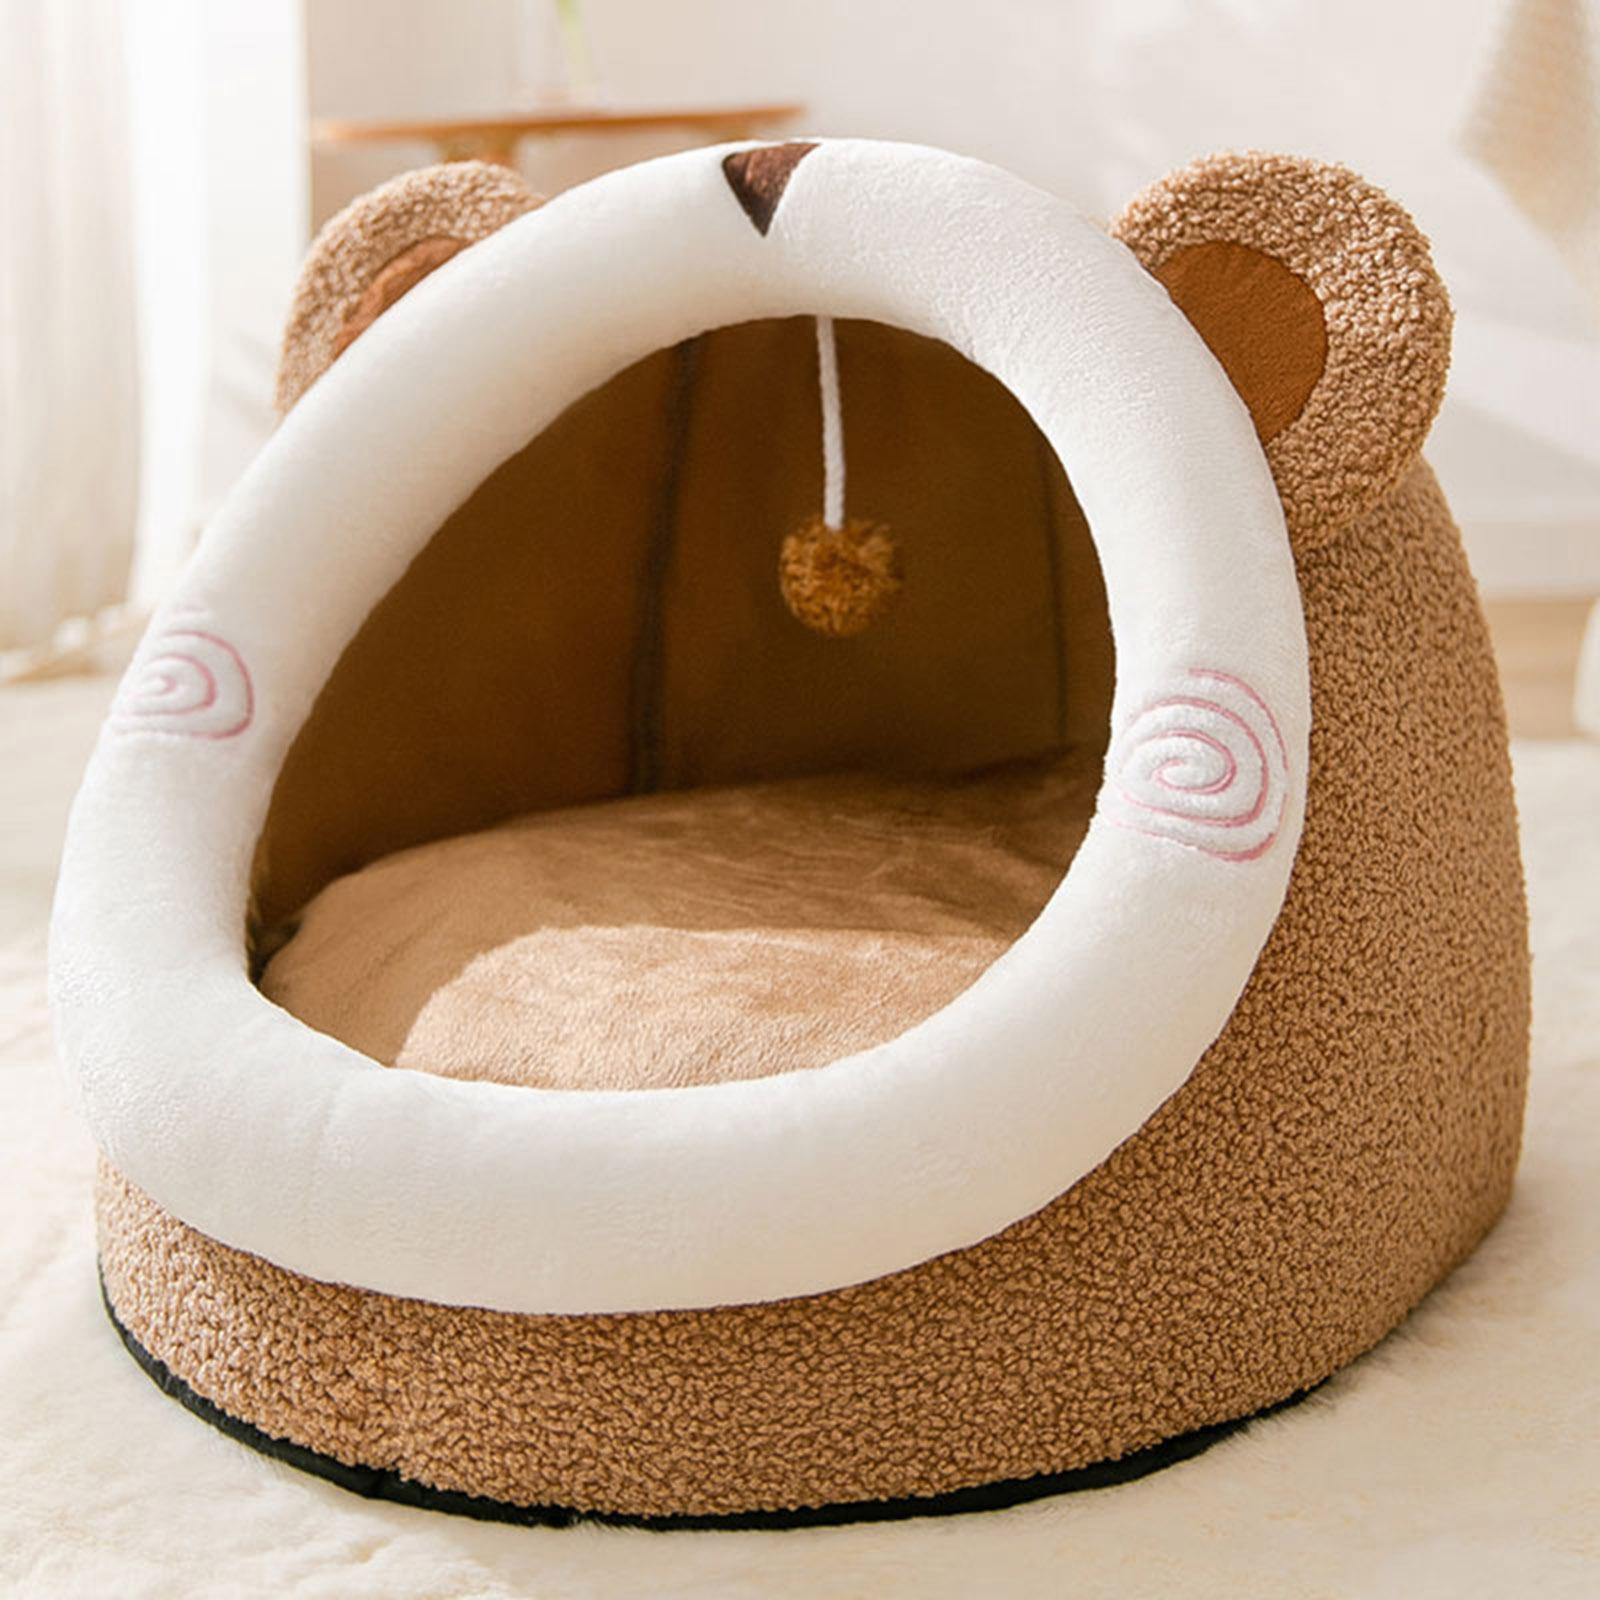 Cute Pet Cat Dog Kennel Cave Sleeping Bed Soft Warm Nest House S ...